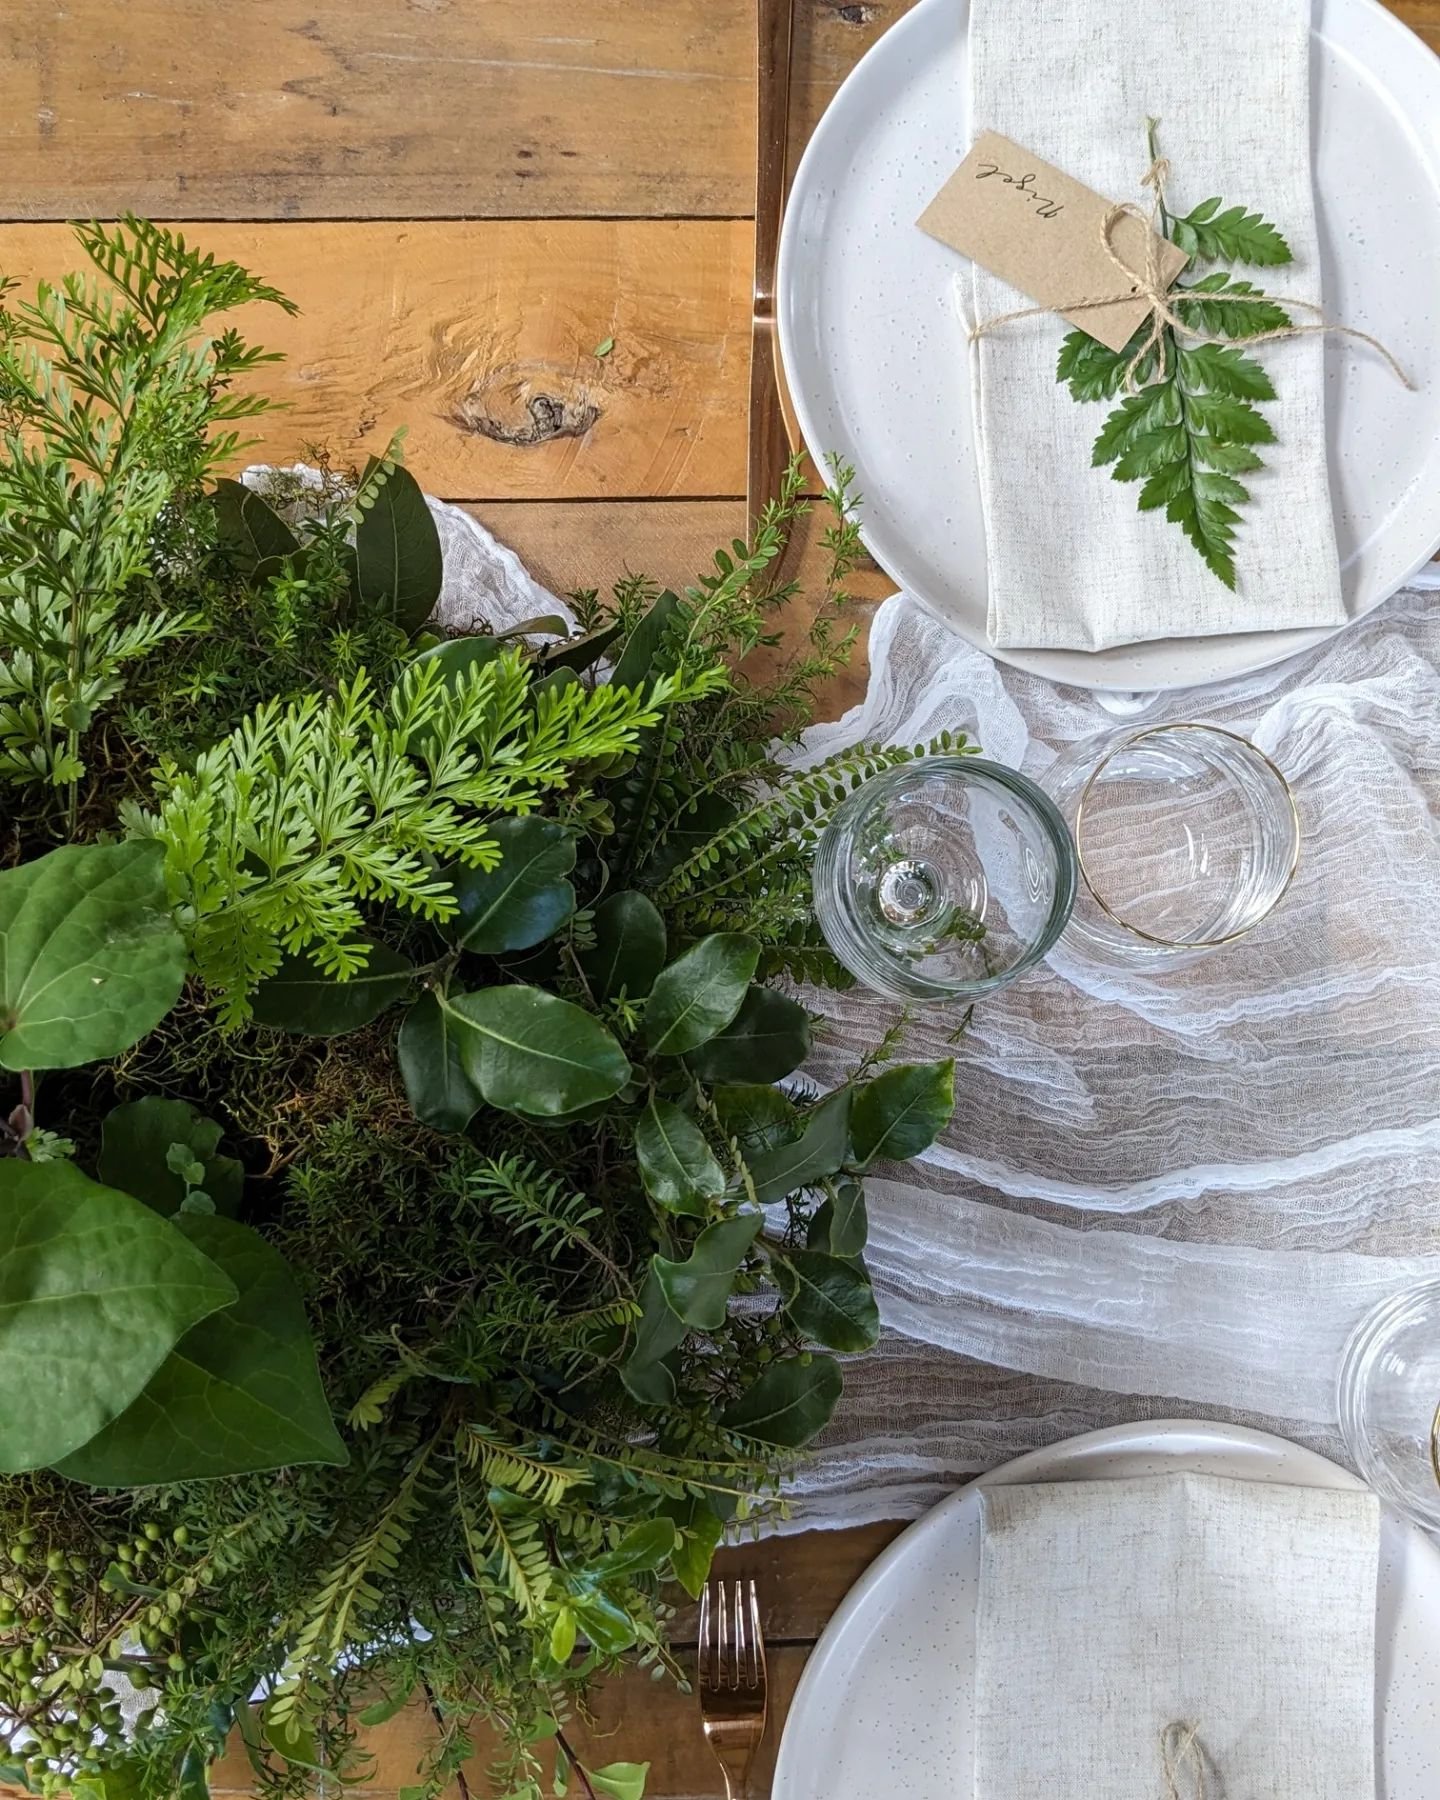 The natural beauty of light wood, white linens and lush greenery. What vibe are you channeling for your wedding tablescape? 🤍🍃

#bopweddings #weddingstylingnz #botanicaldecornz